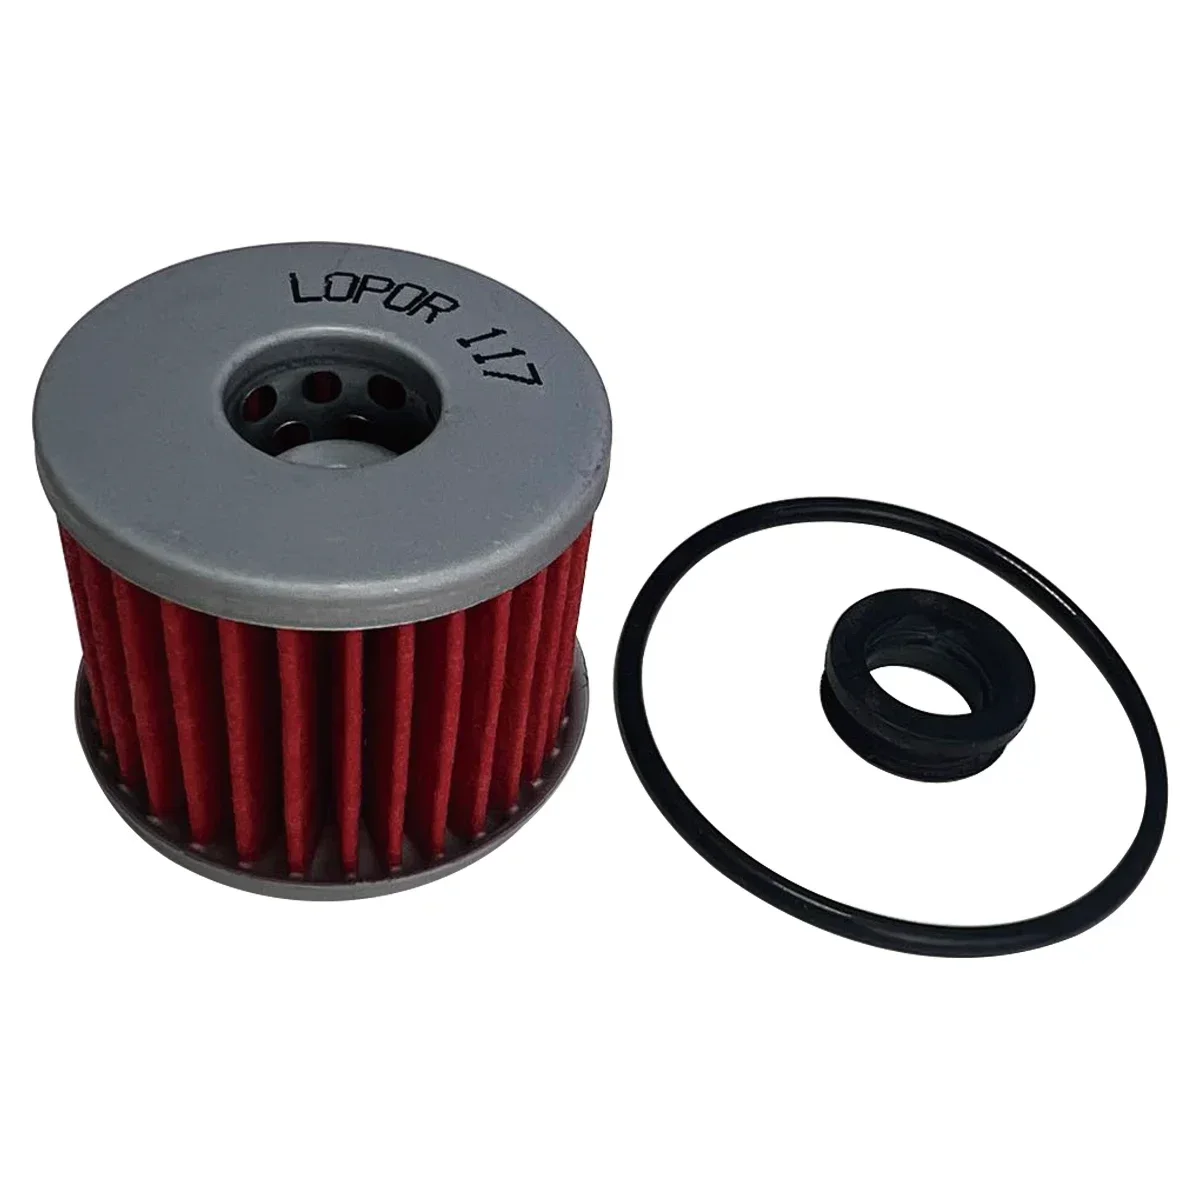 Motorcycle Oil Filter For Honda Scooter C125 A Super Cub 700 Integra NSS750 M Forza DCT 750 Integra NC750 X-ADV 750 ADV750 HF117 8pcs motorcycle friction clutch plates for honda vt750 shadow nc750 nc700 ctx700 nt650 vt750s ace 750 shadow spirit 750 nc750s